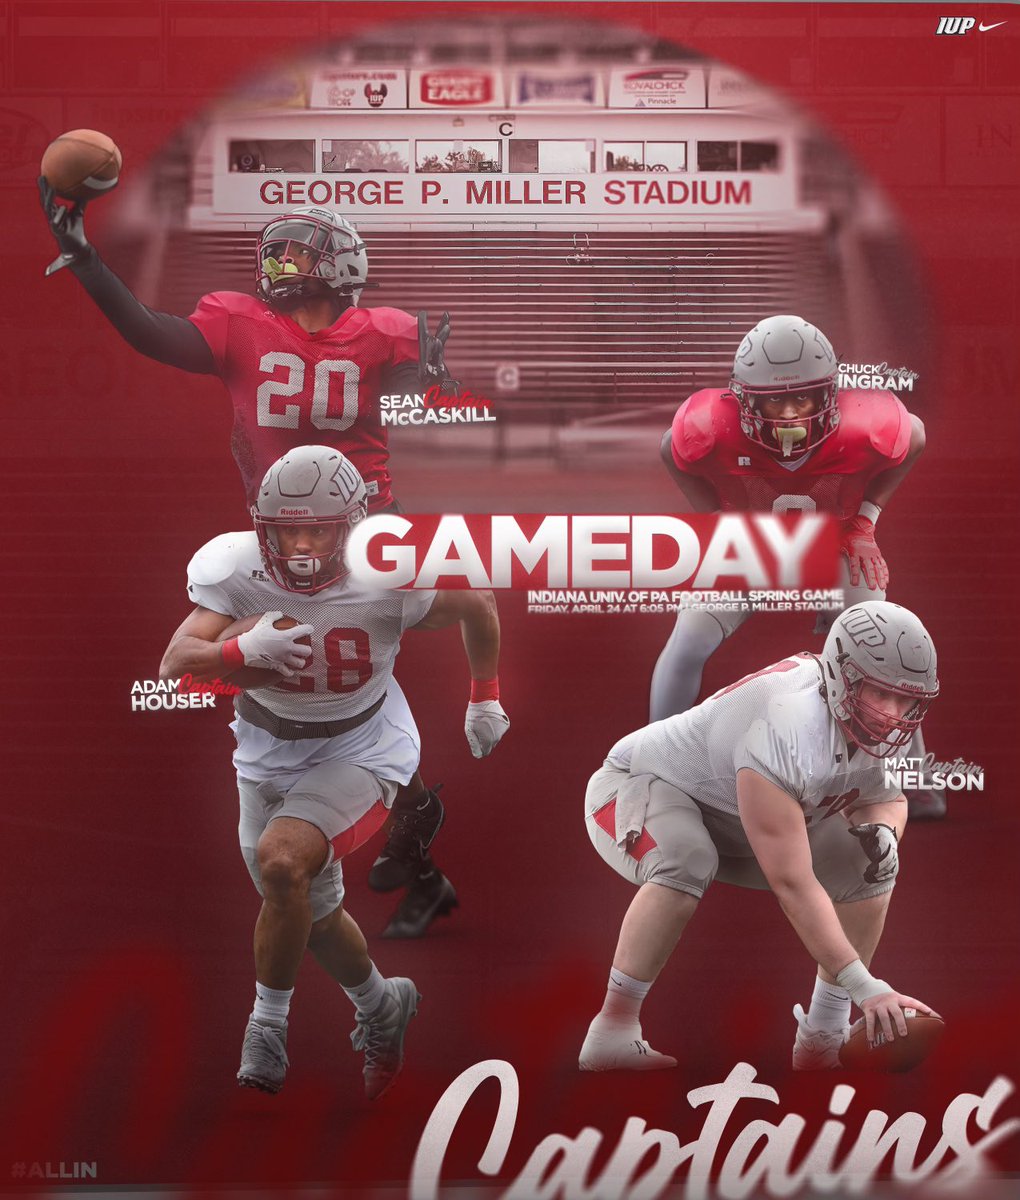 Springing into our final action of the semester. We host the annual IUP Spring Game tonight at Miller Stadium! Kickoff comes around 6:05 PM this evening, admission is free and open to the public. #ALLIN